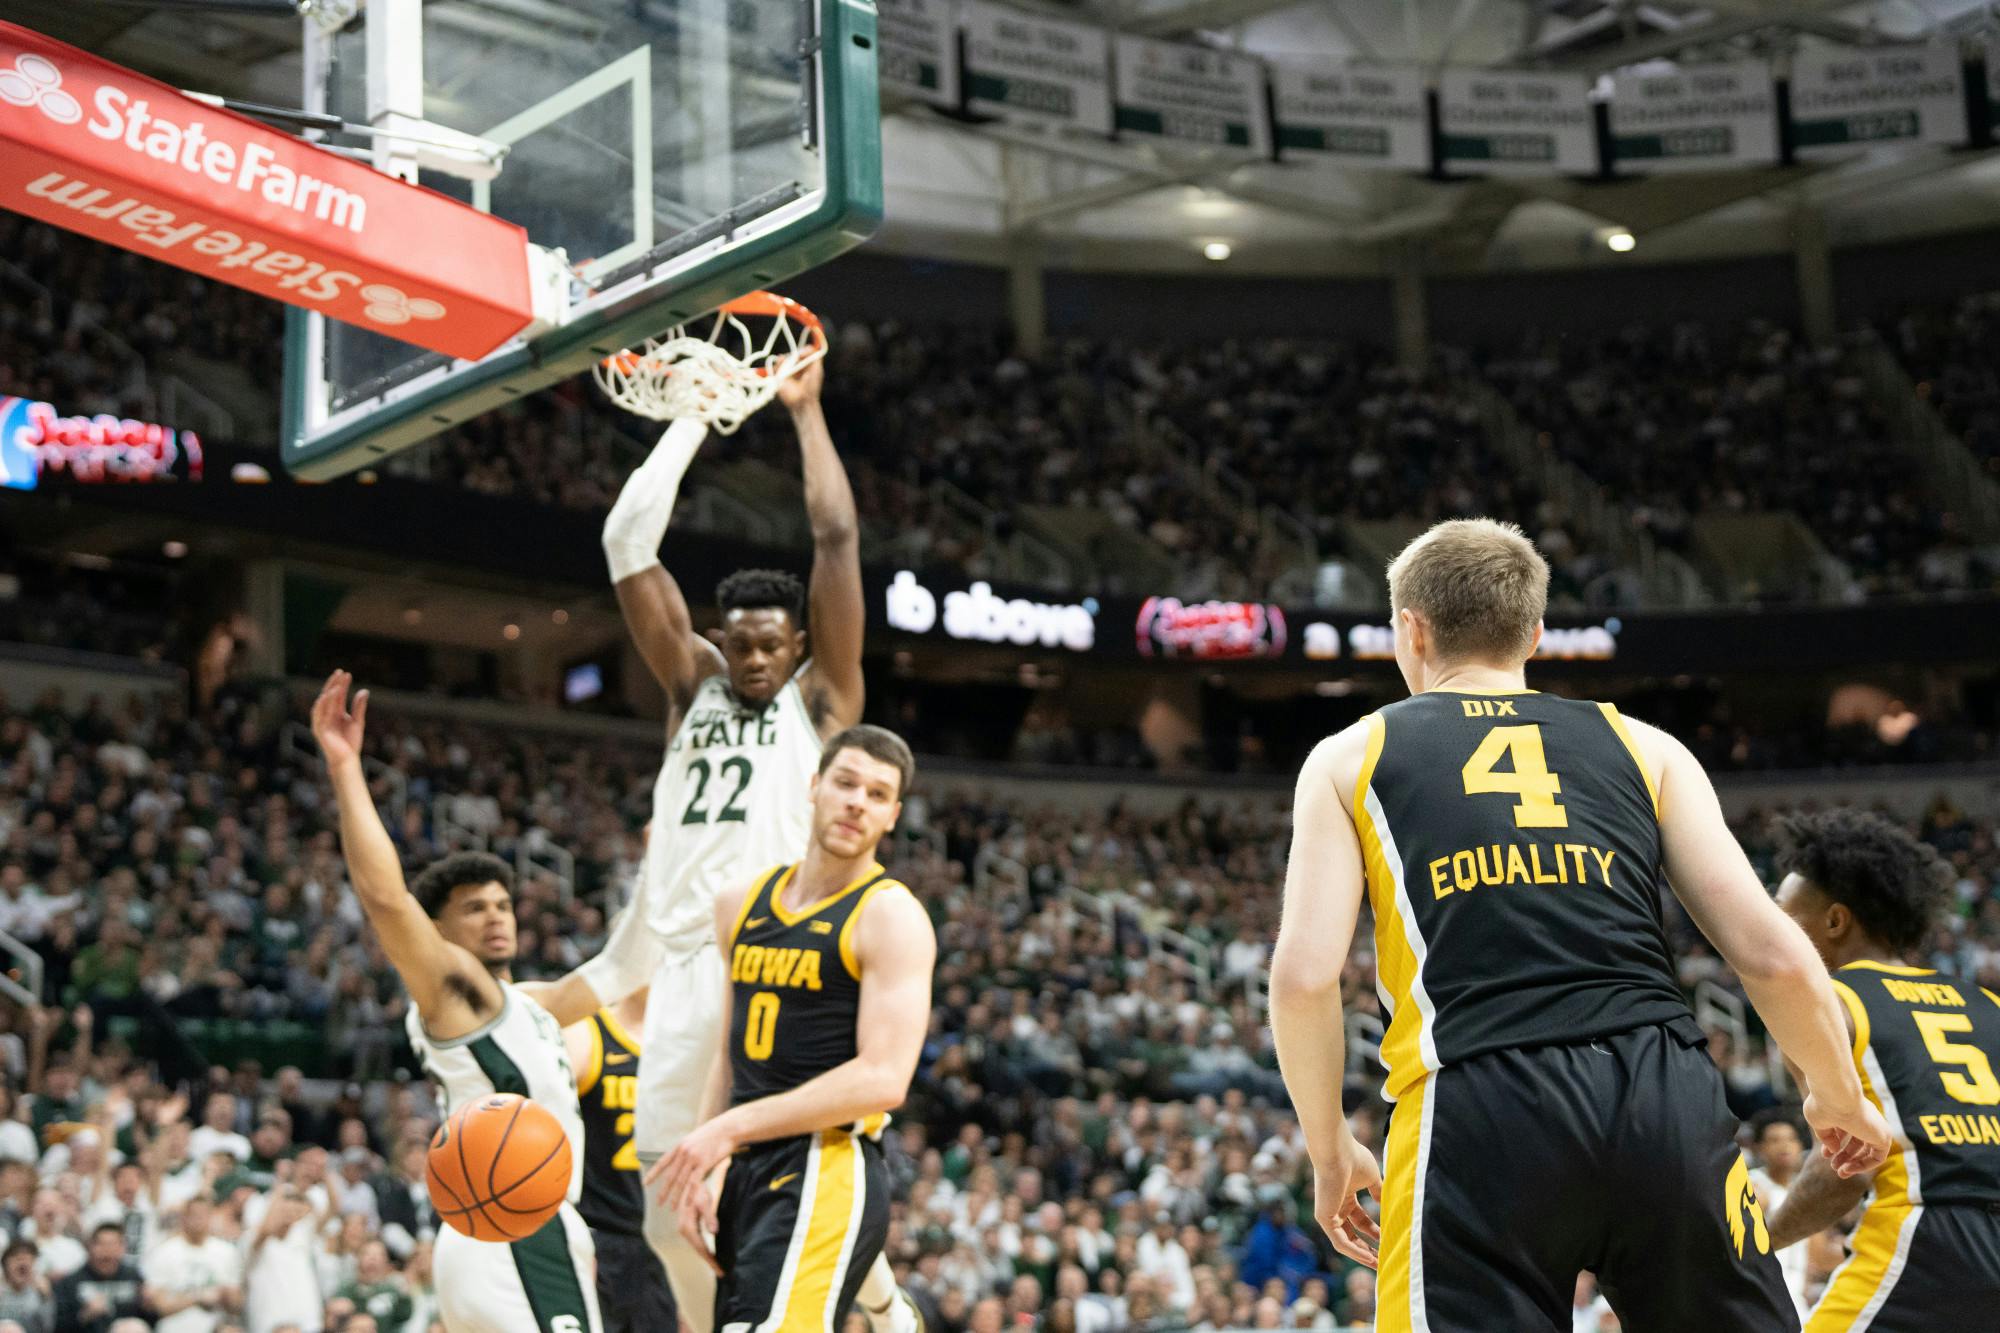 <p>Junior center Maddy Sissoko, dunking the ball at the Iowa v. MSU game held at the Breslin Center on January 26, 2023, The Spartans defeated the Hawkeyes 61-63.</p>